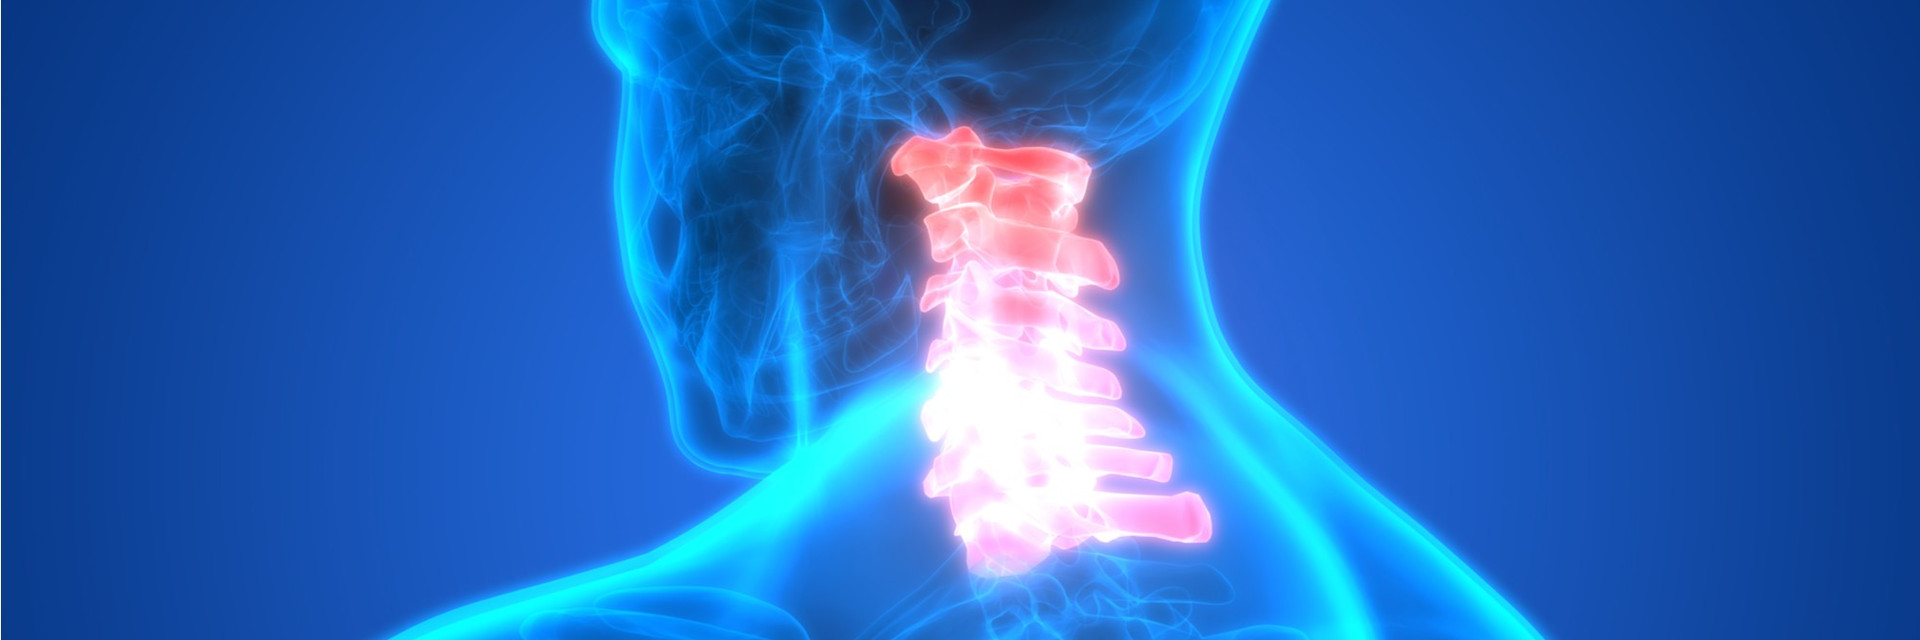 cervical-herniated-disc-treatment-in-nyc